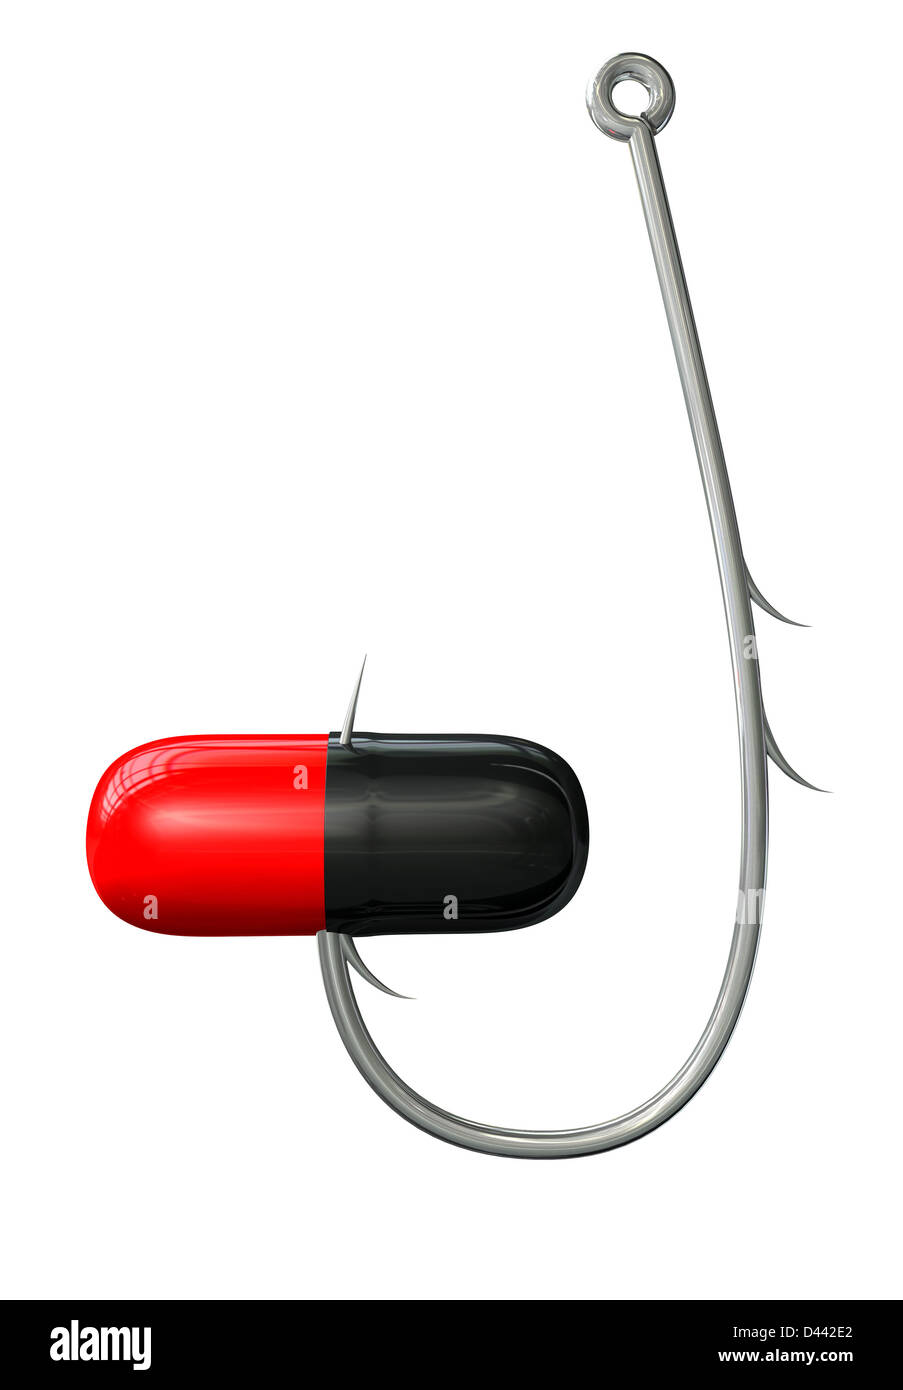 A literal description of a metal fishing hook hooked onto a red and black medicine capsule on an isolated background Stock Photo